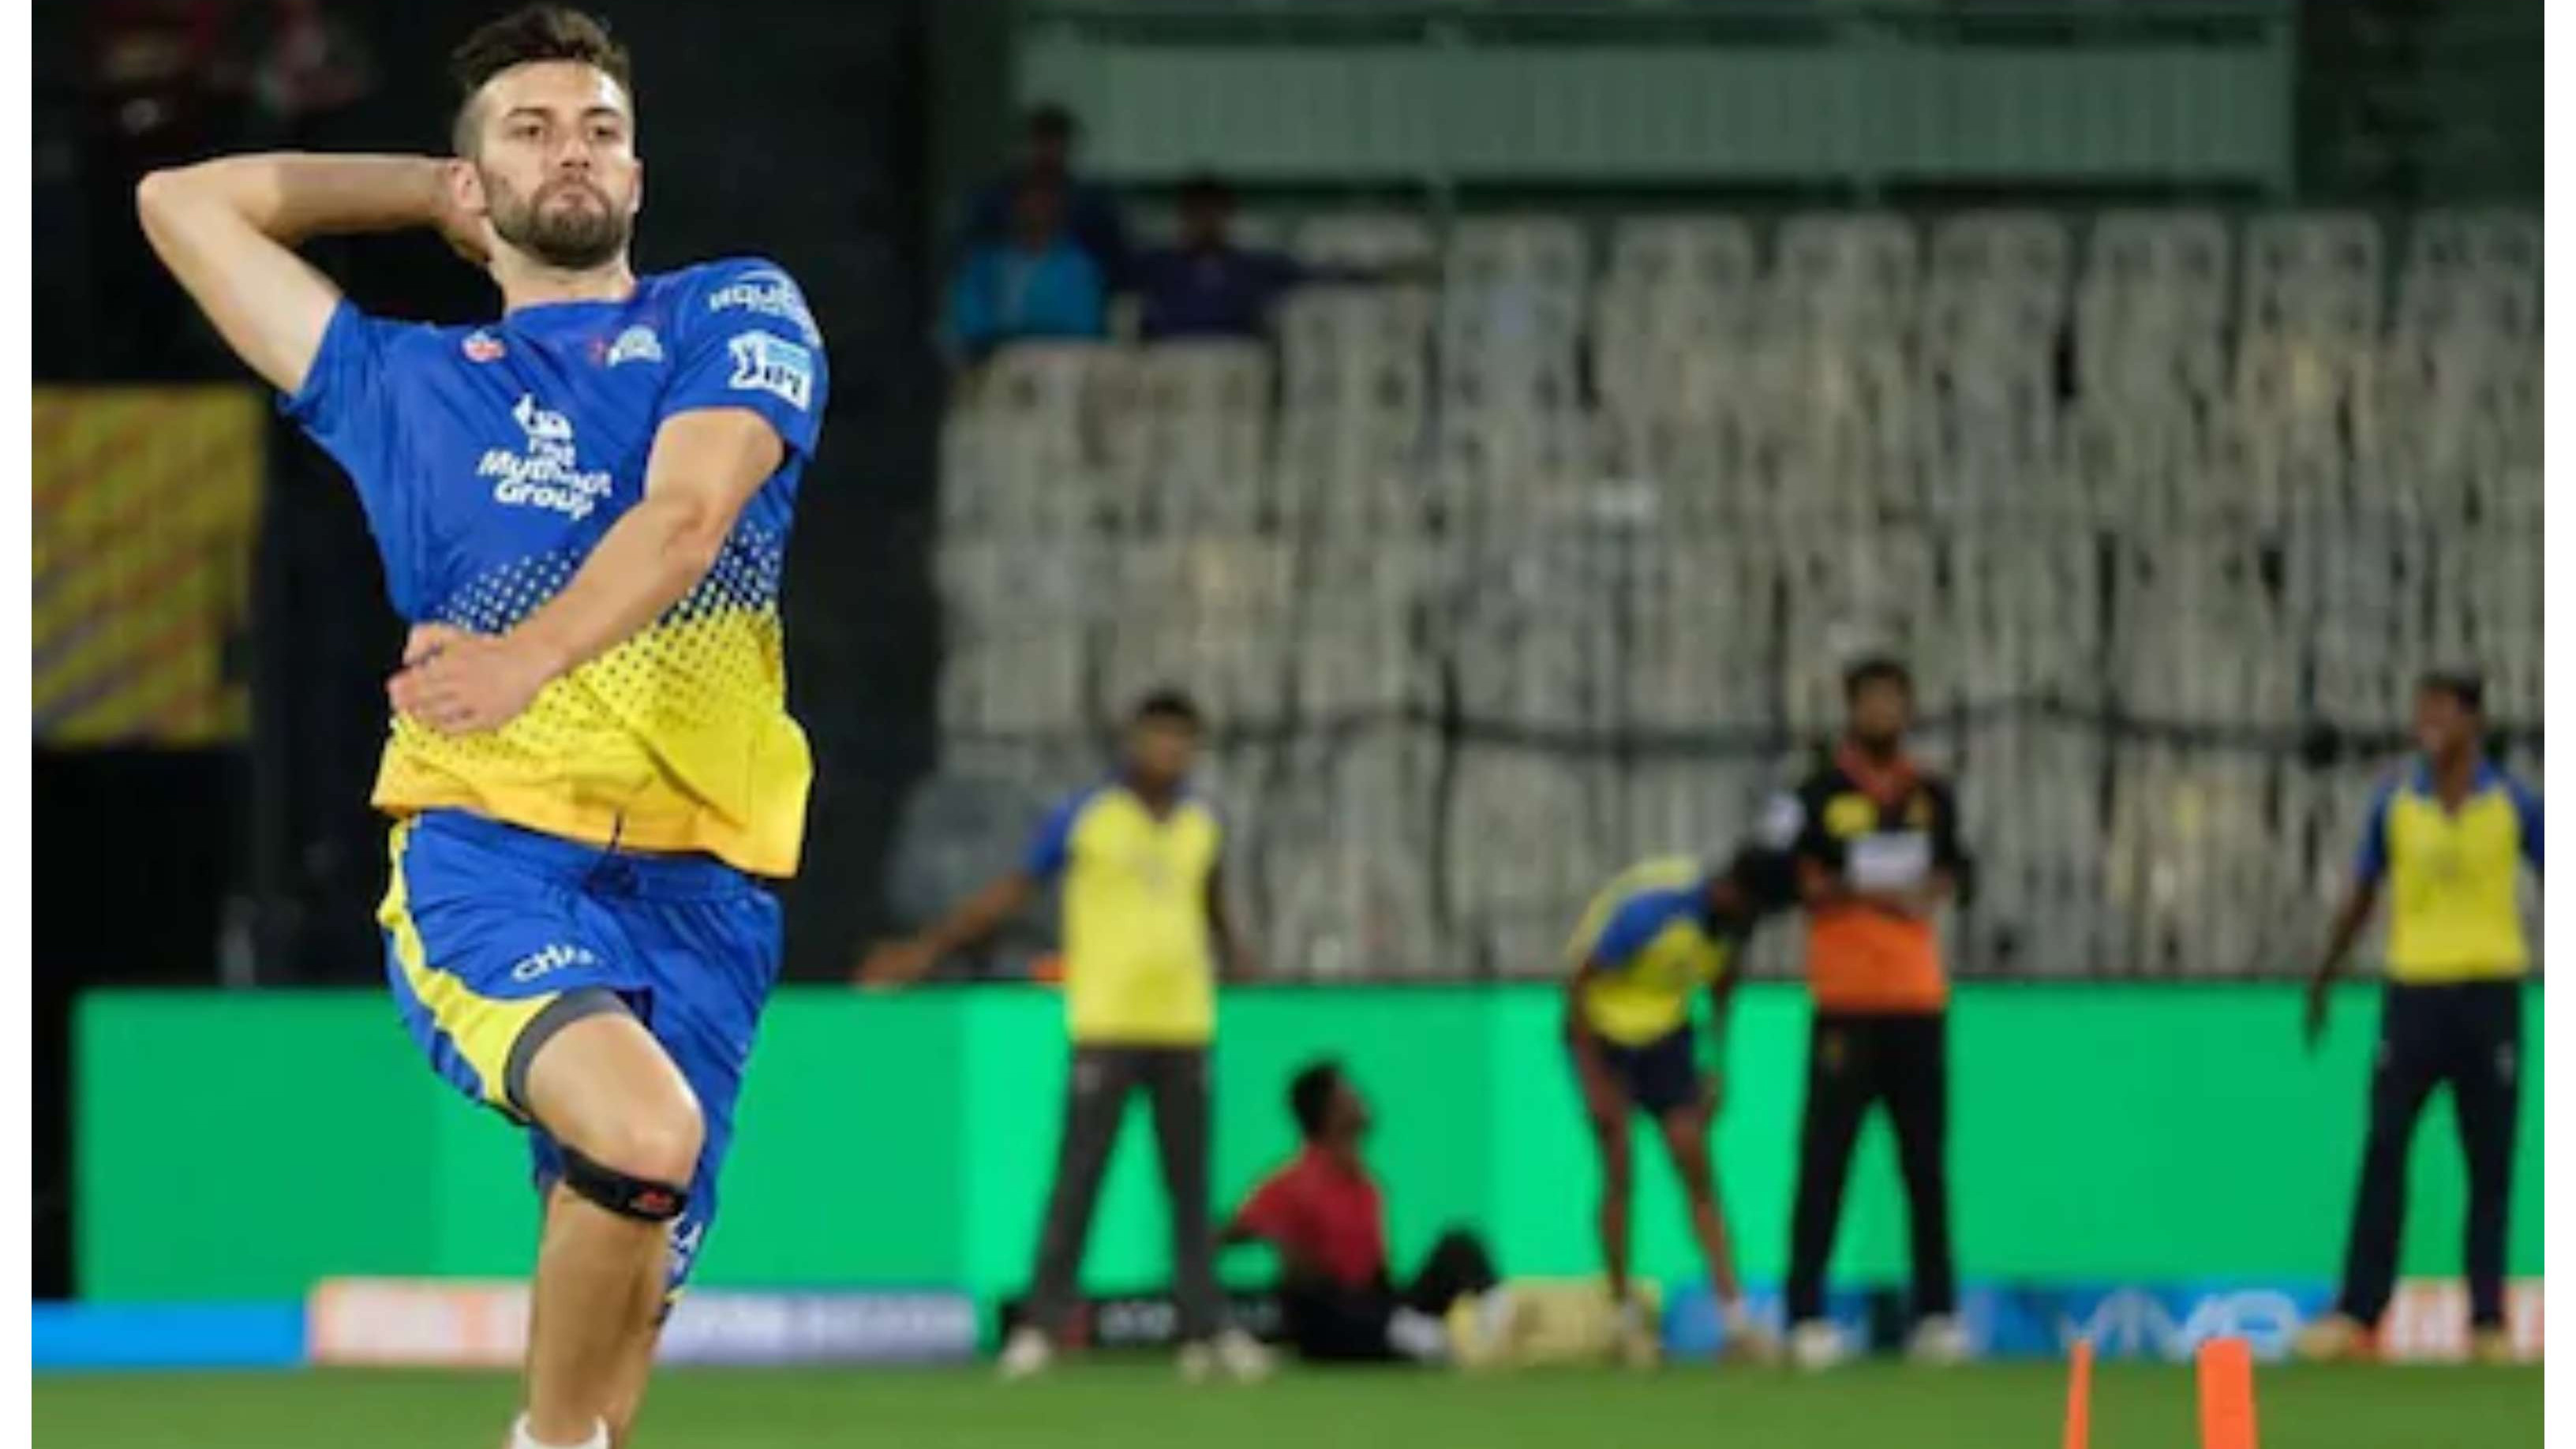 IPL 2021: Mark Wood opts out of player auction, says report